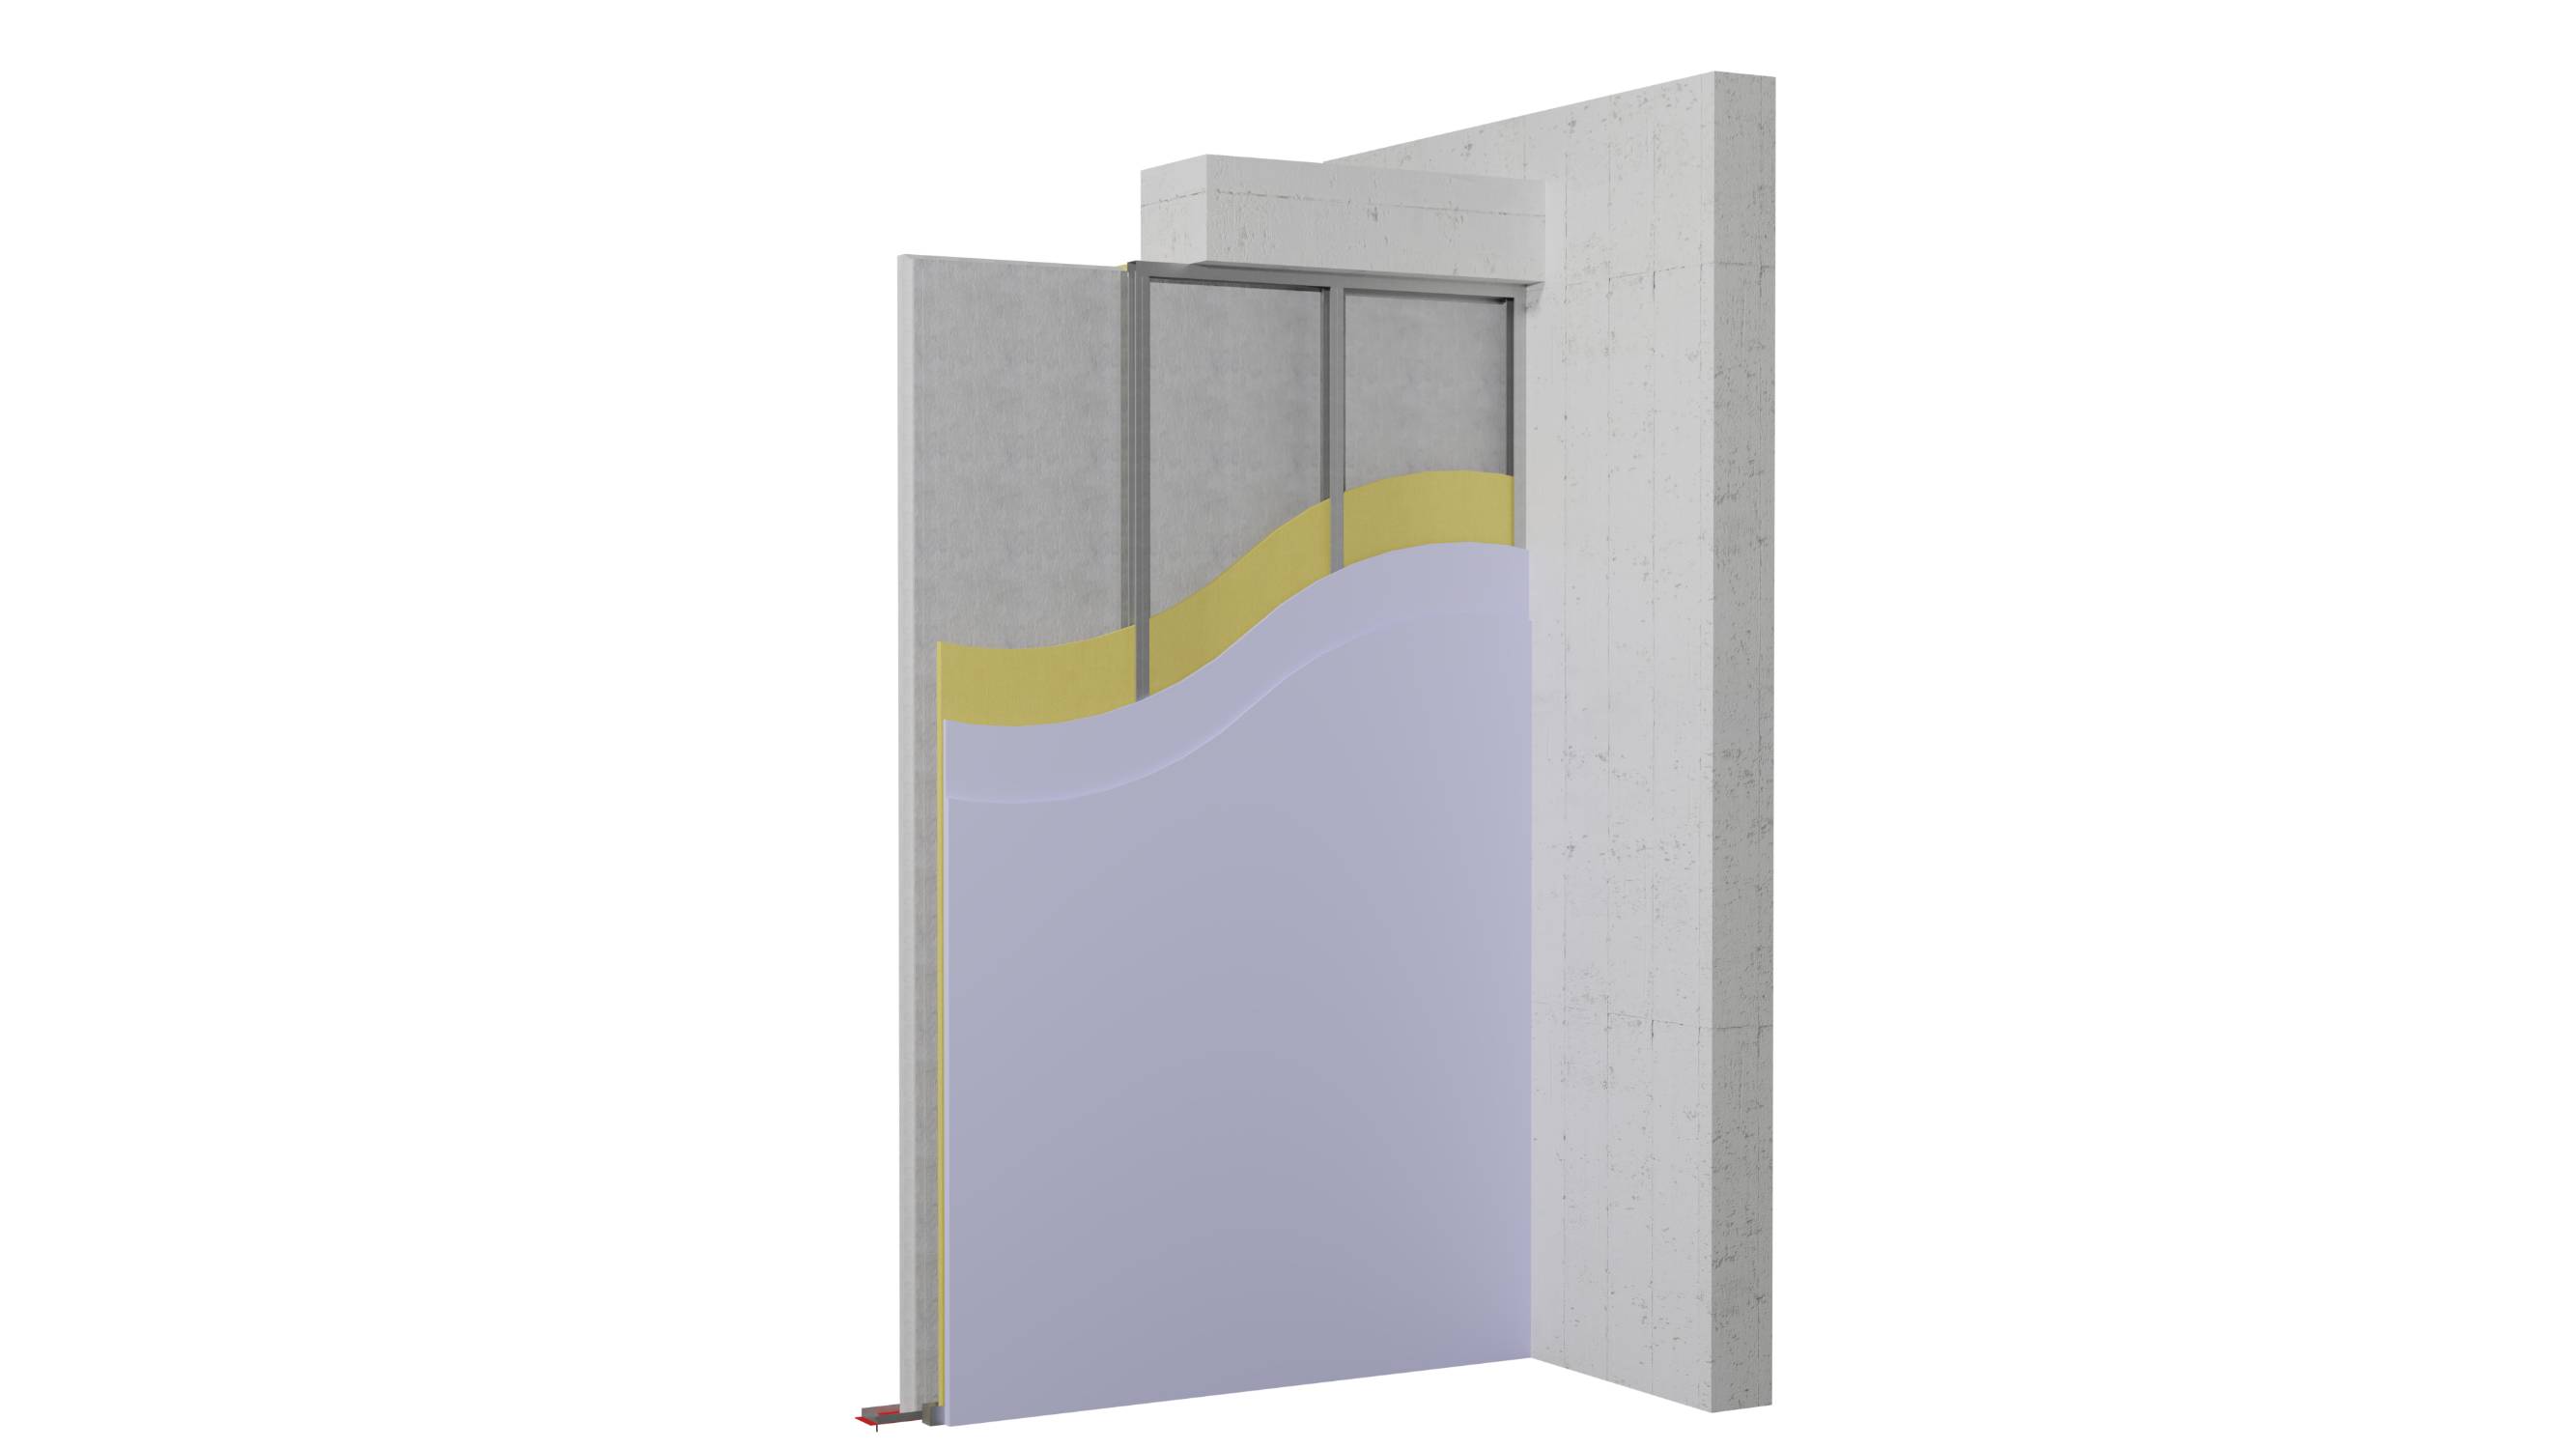 Hybrid Specwall HB004 (Acoustic & fire rated wall panel systems for internal separating walls) - Lightweight Concrete Panel